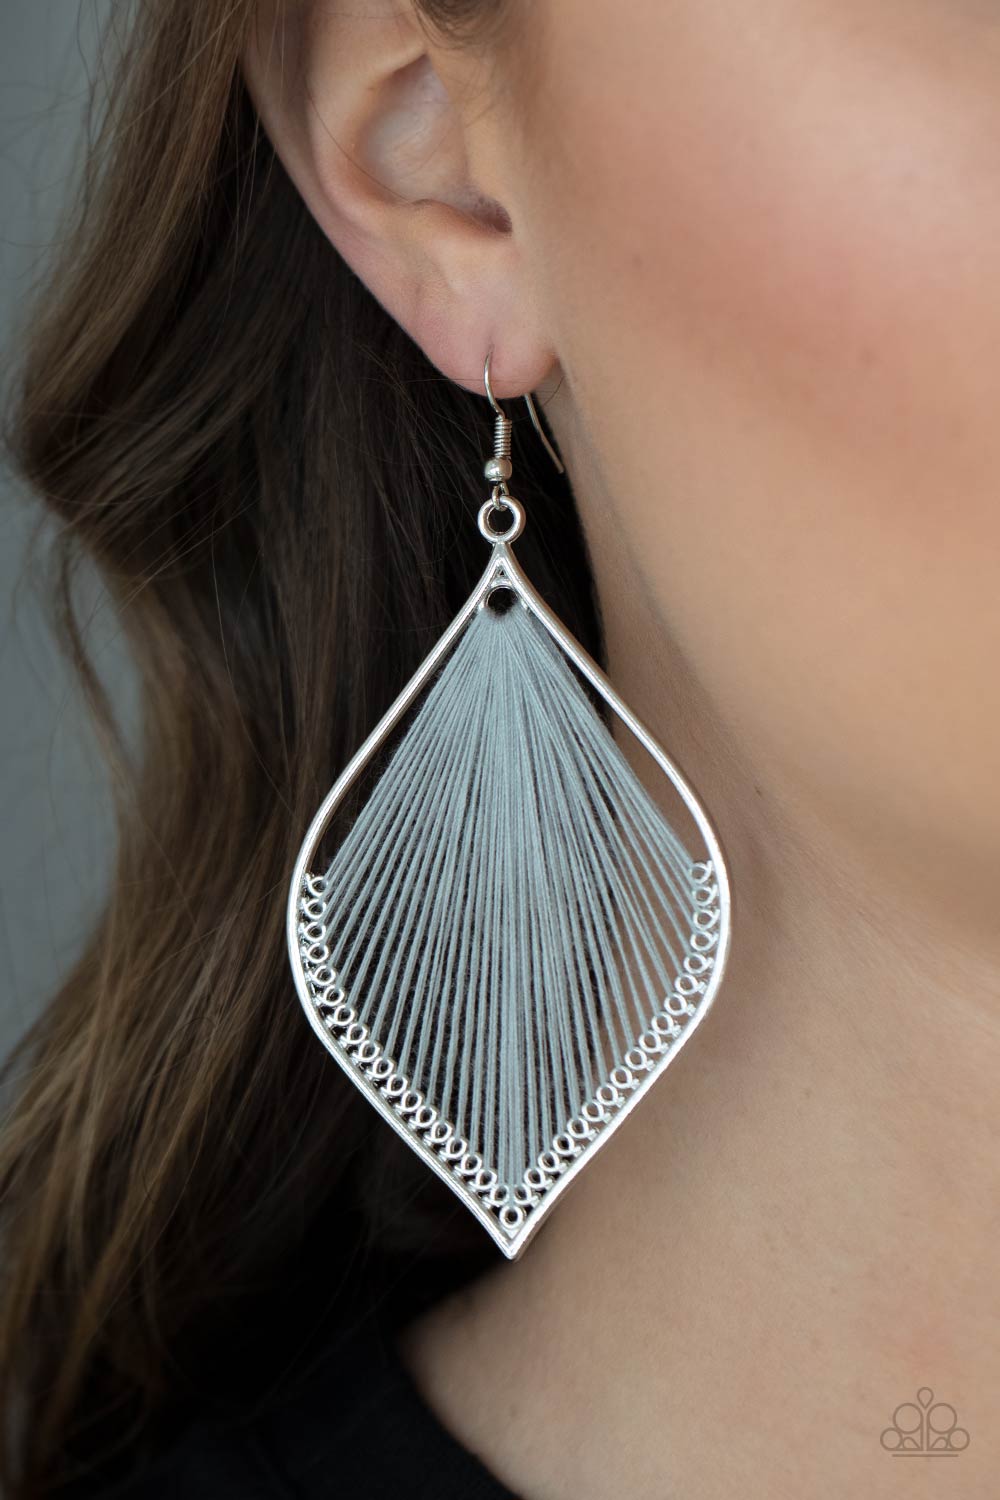 String Theory - Silver Earrings - Princess Glam Shop